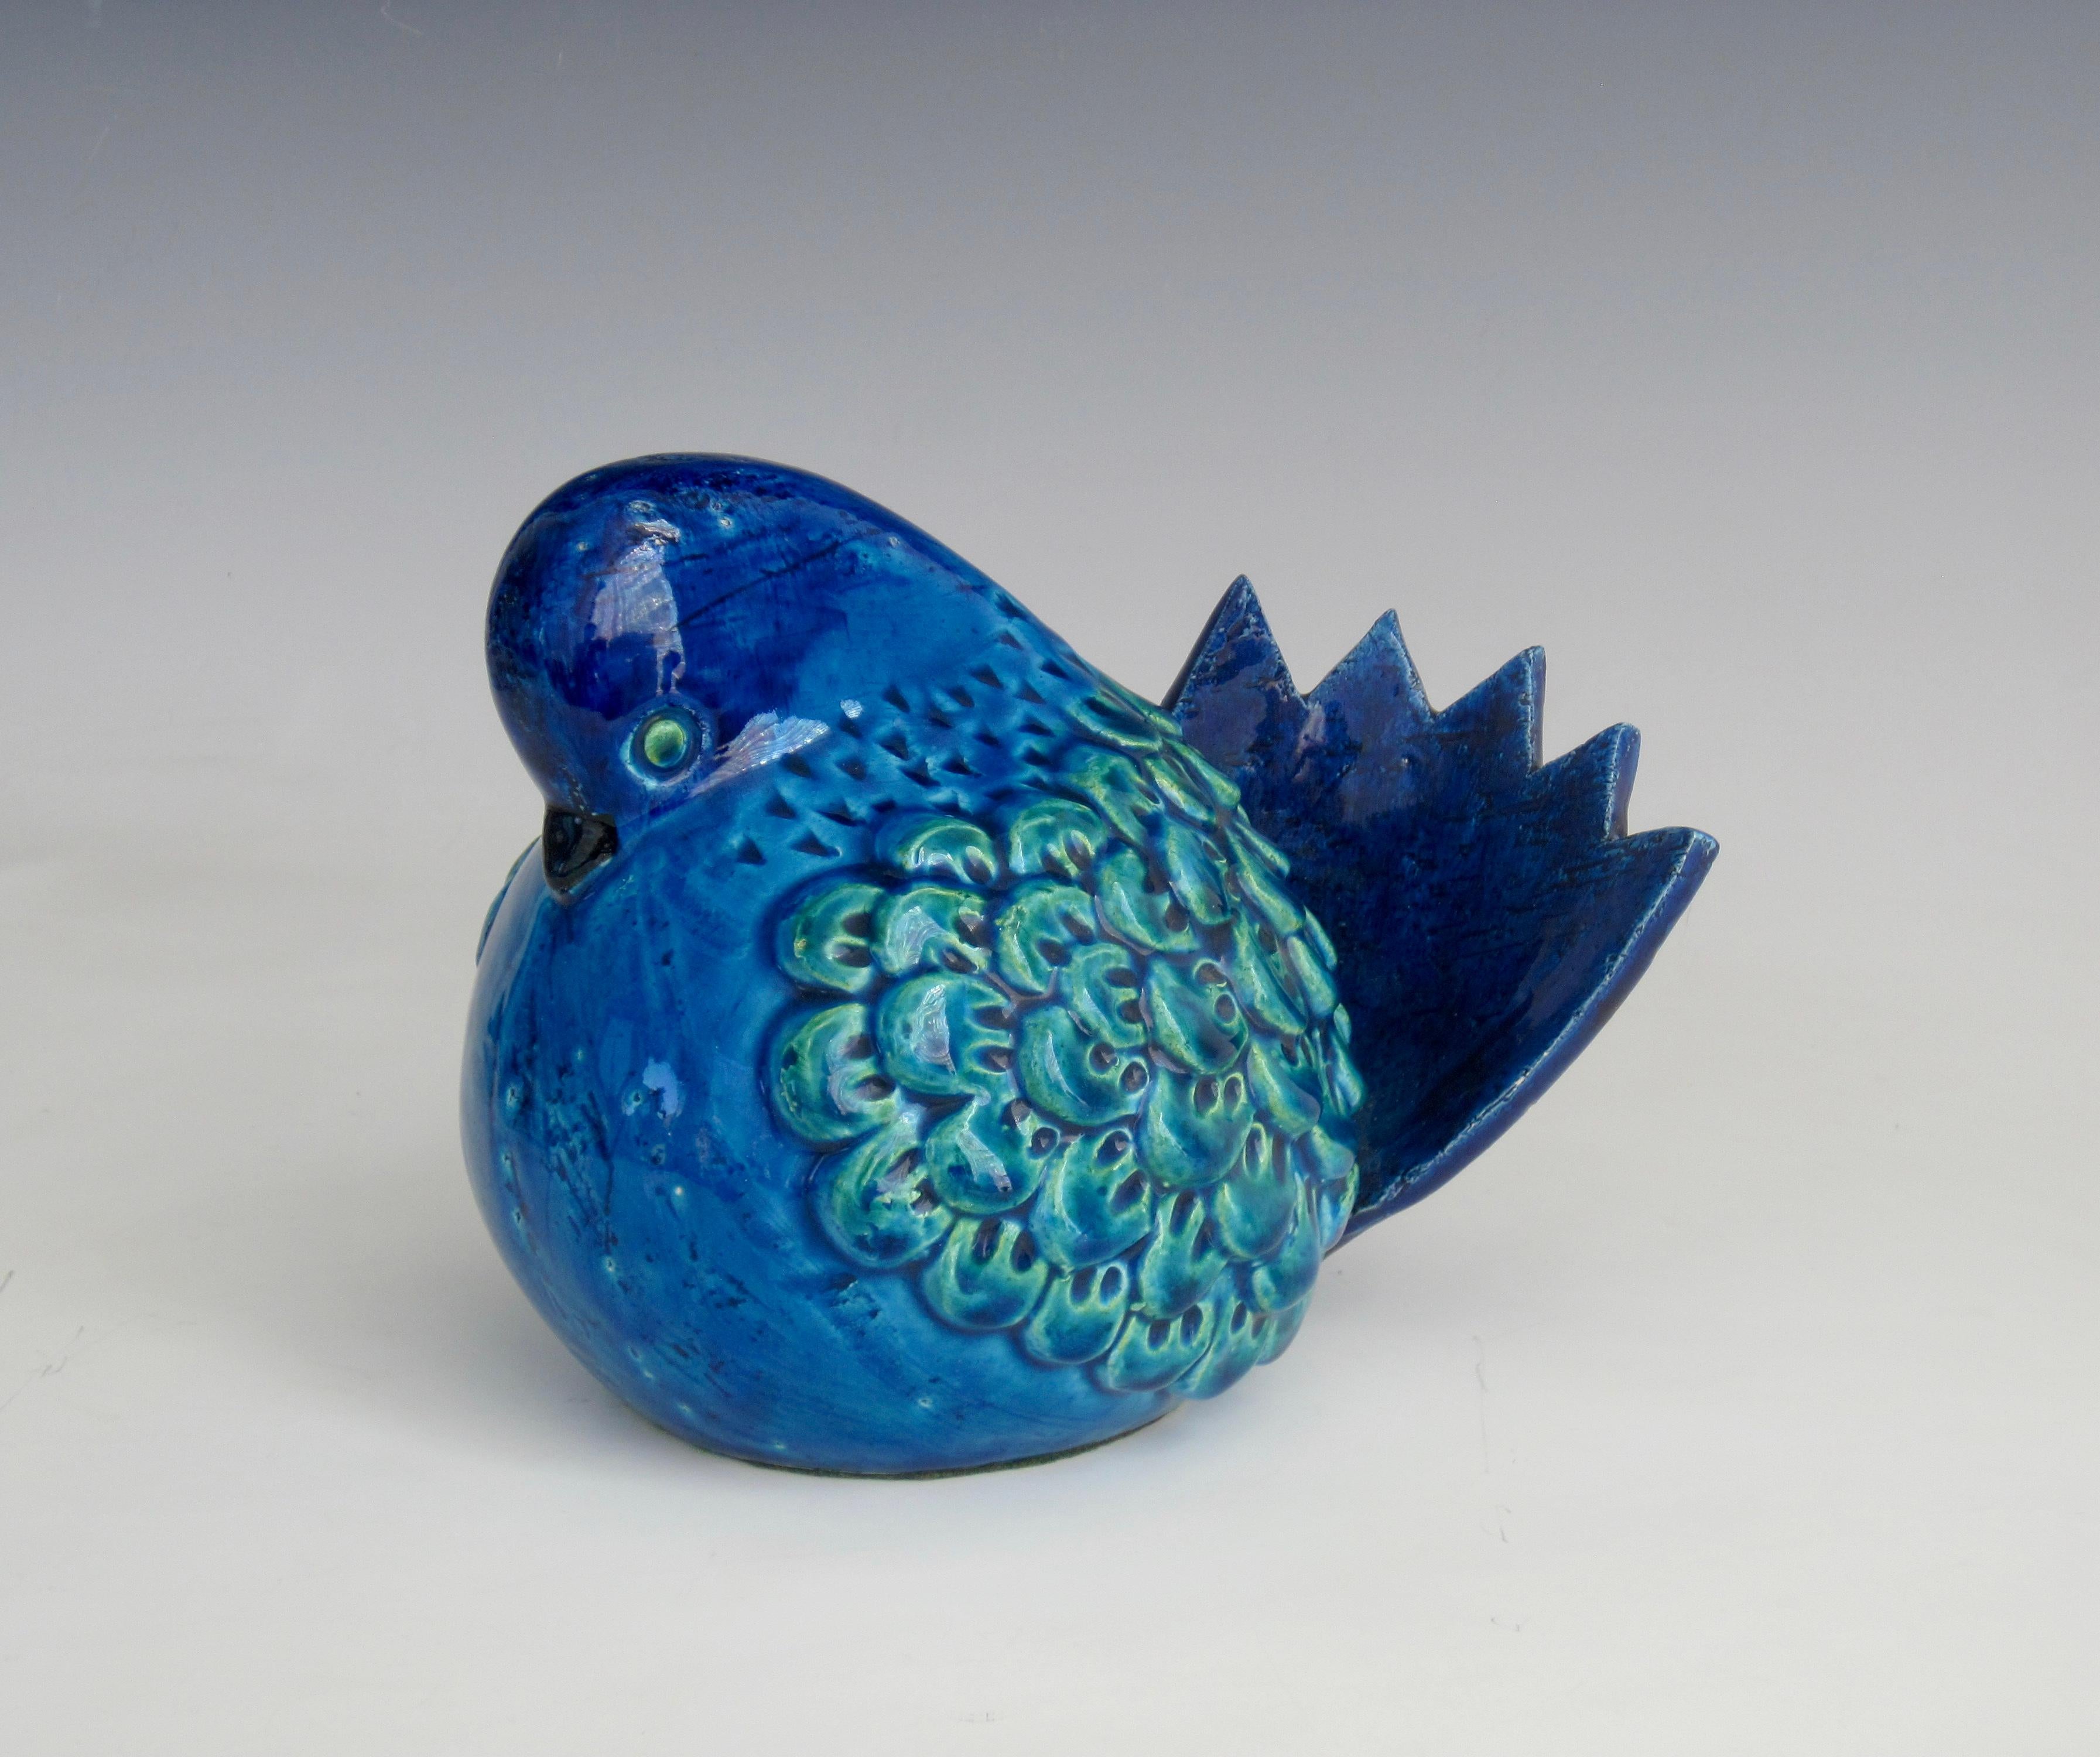 A hand crafted Aldo Londi (1911–2003) for Bitossi Ceramiche bird sculpture in Rimini Blue. The striking blue color and unusual use of texture make this series a hallmark for Bitossi and highly collectible. Bitossi Ceramiche recently turned 100 and